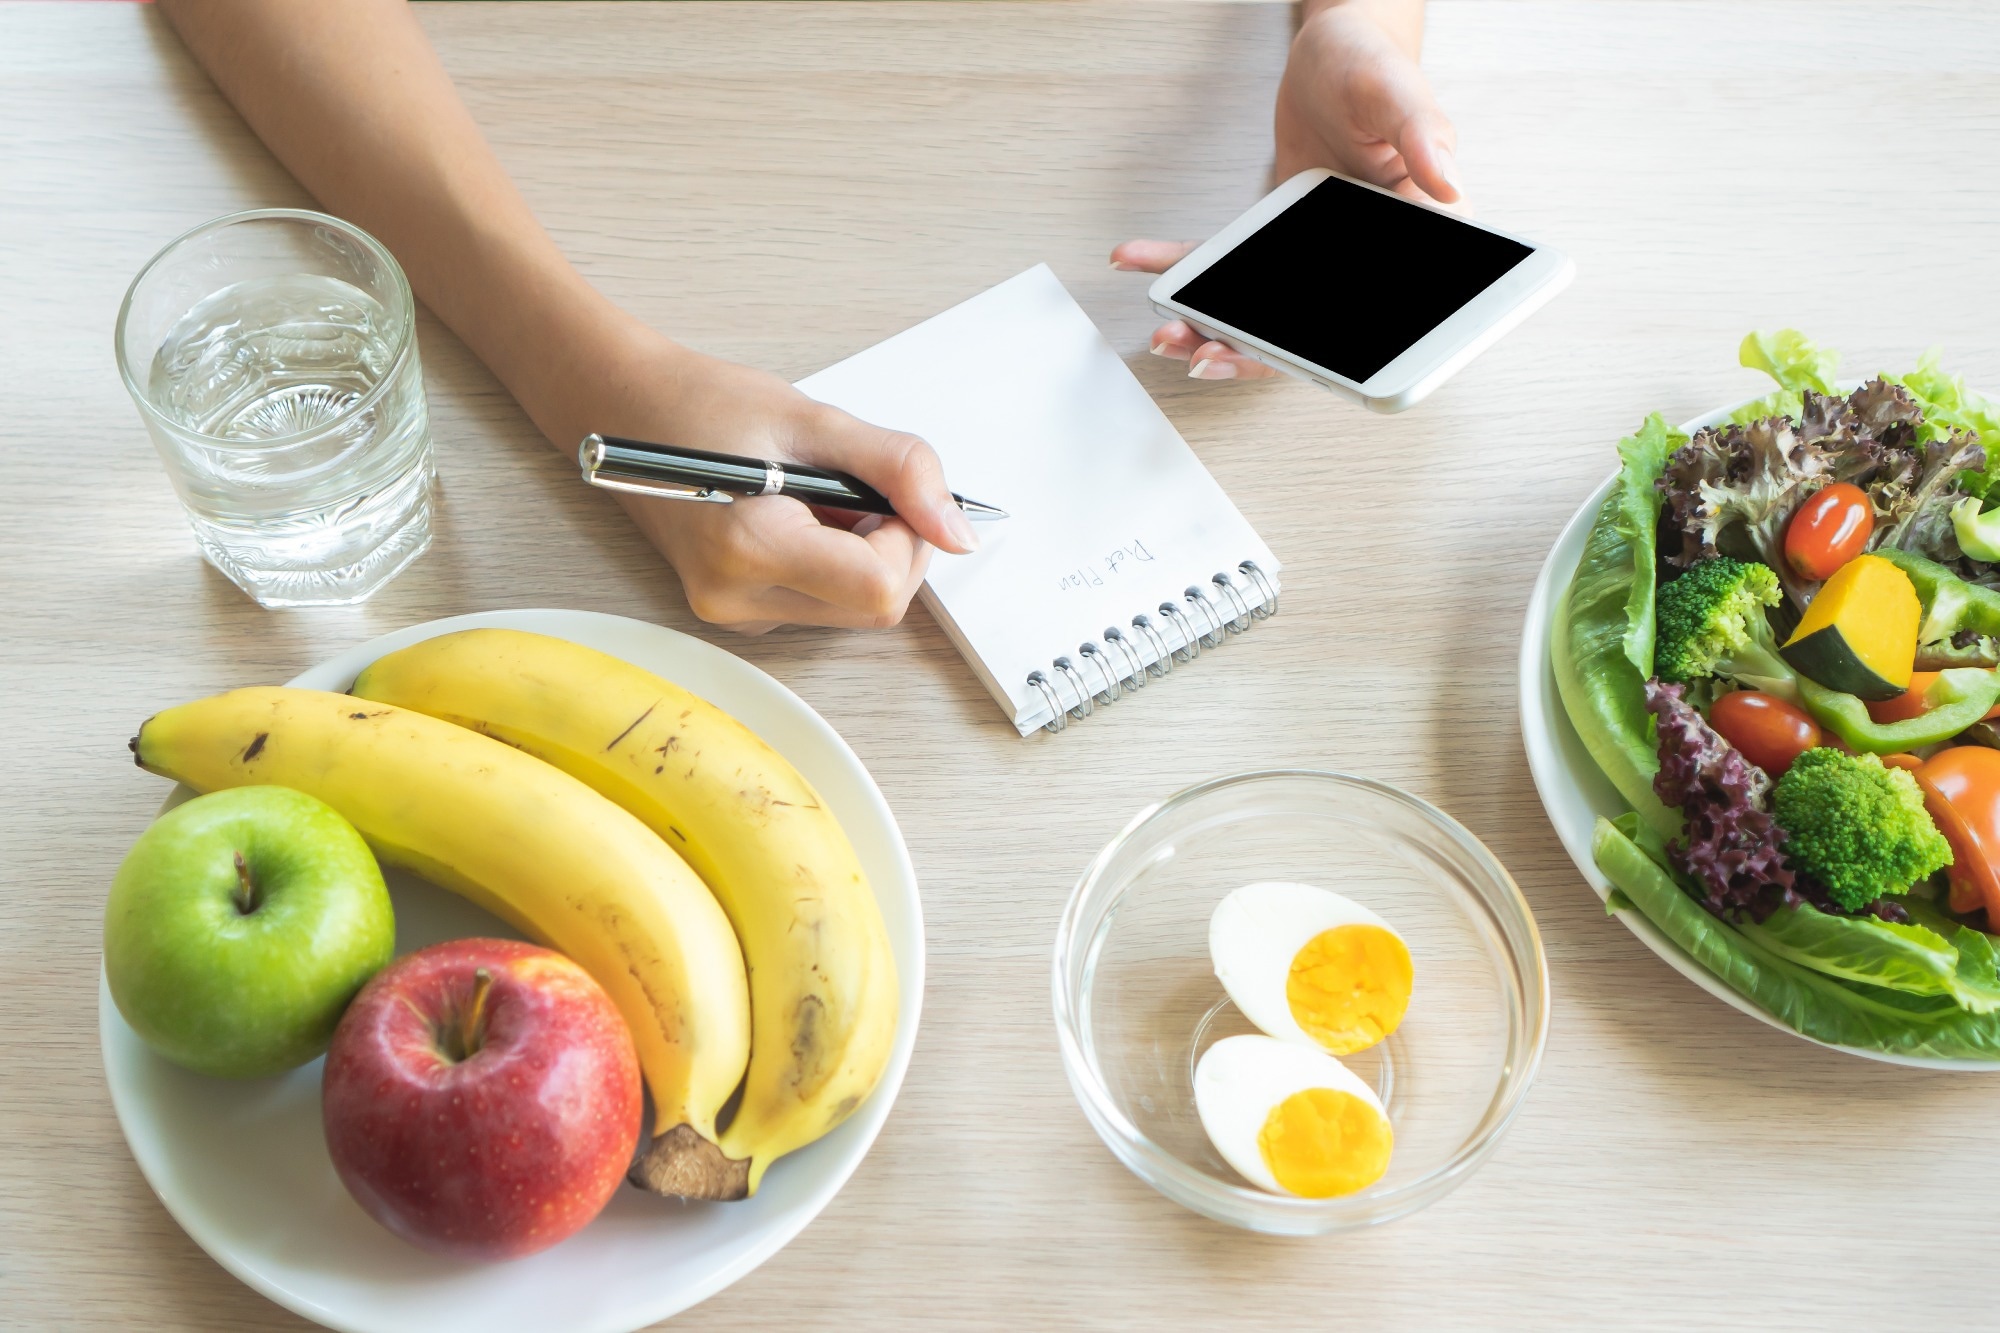 Study: The Effect of a Very-Low-Calorie Diet (VLCD) vs. a Moderate Energy Deficit Diet in Obese Women with Polycystic Ovary Syndrome (PCOS)—A Randomised Controlled Trial. Image Credit: Pormezz/Shutterstock.com